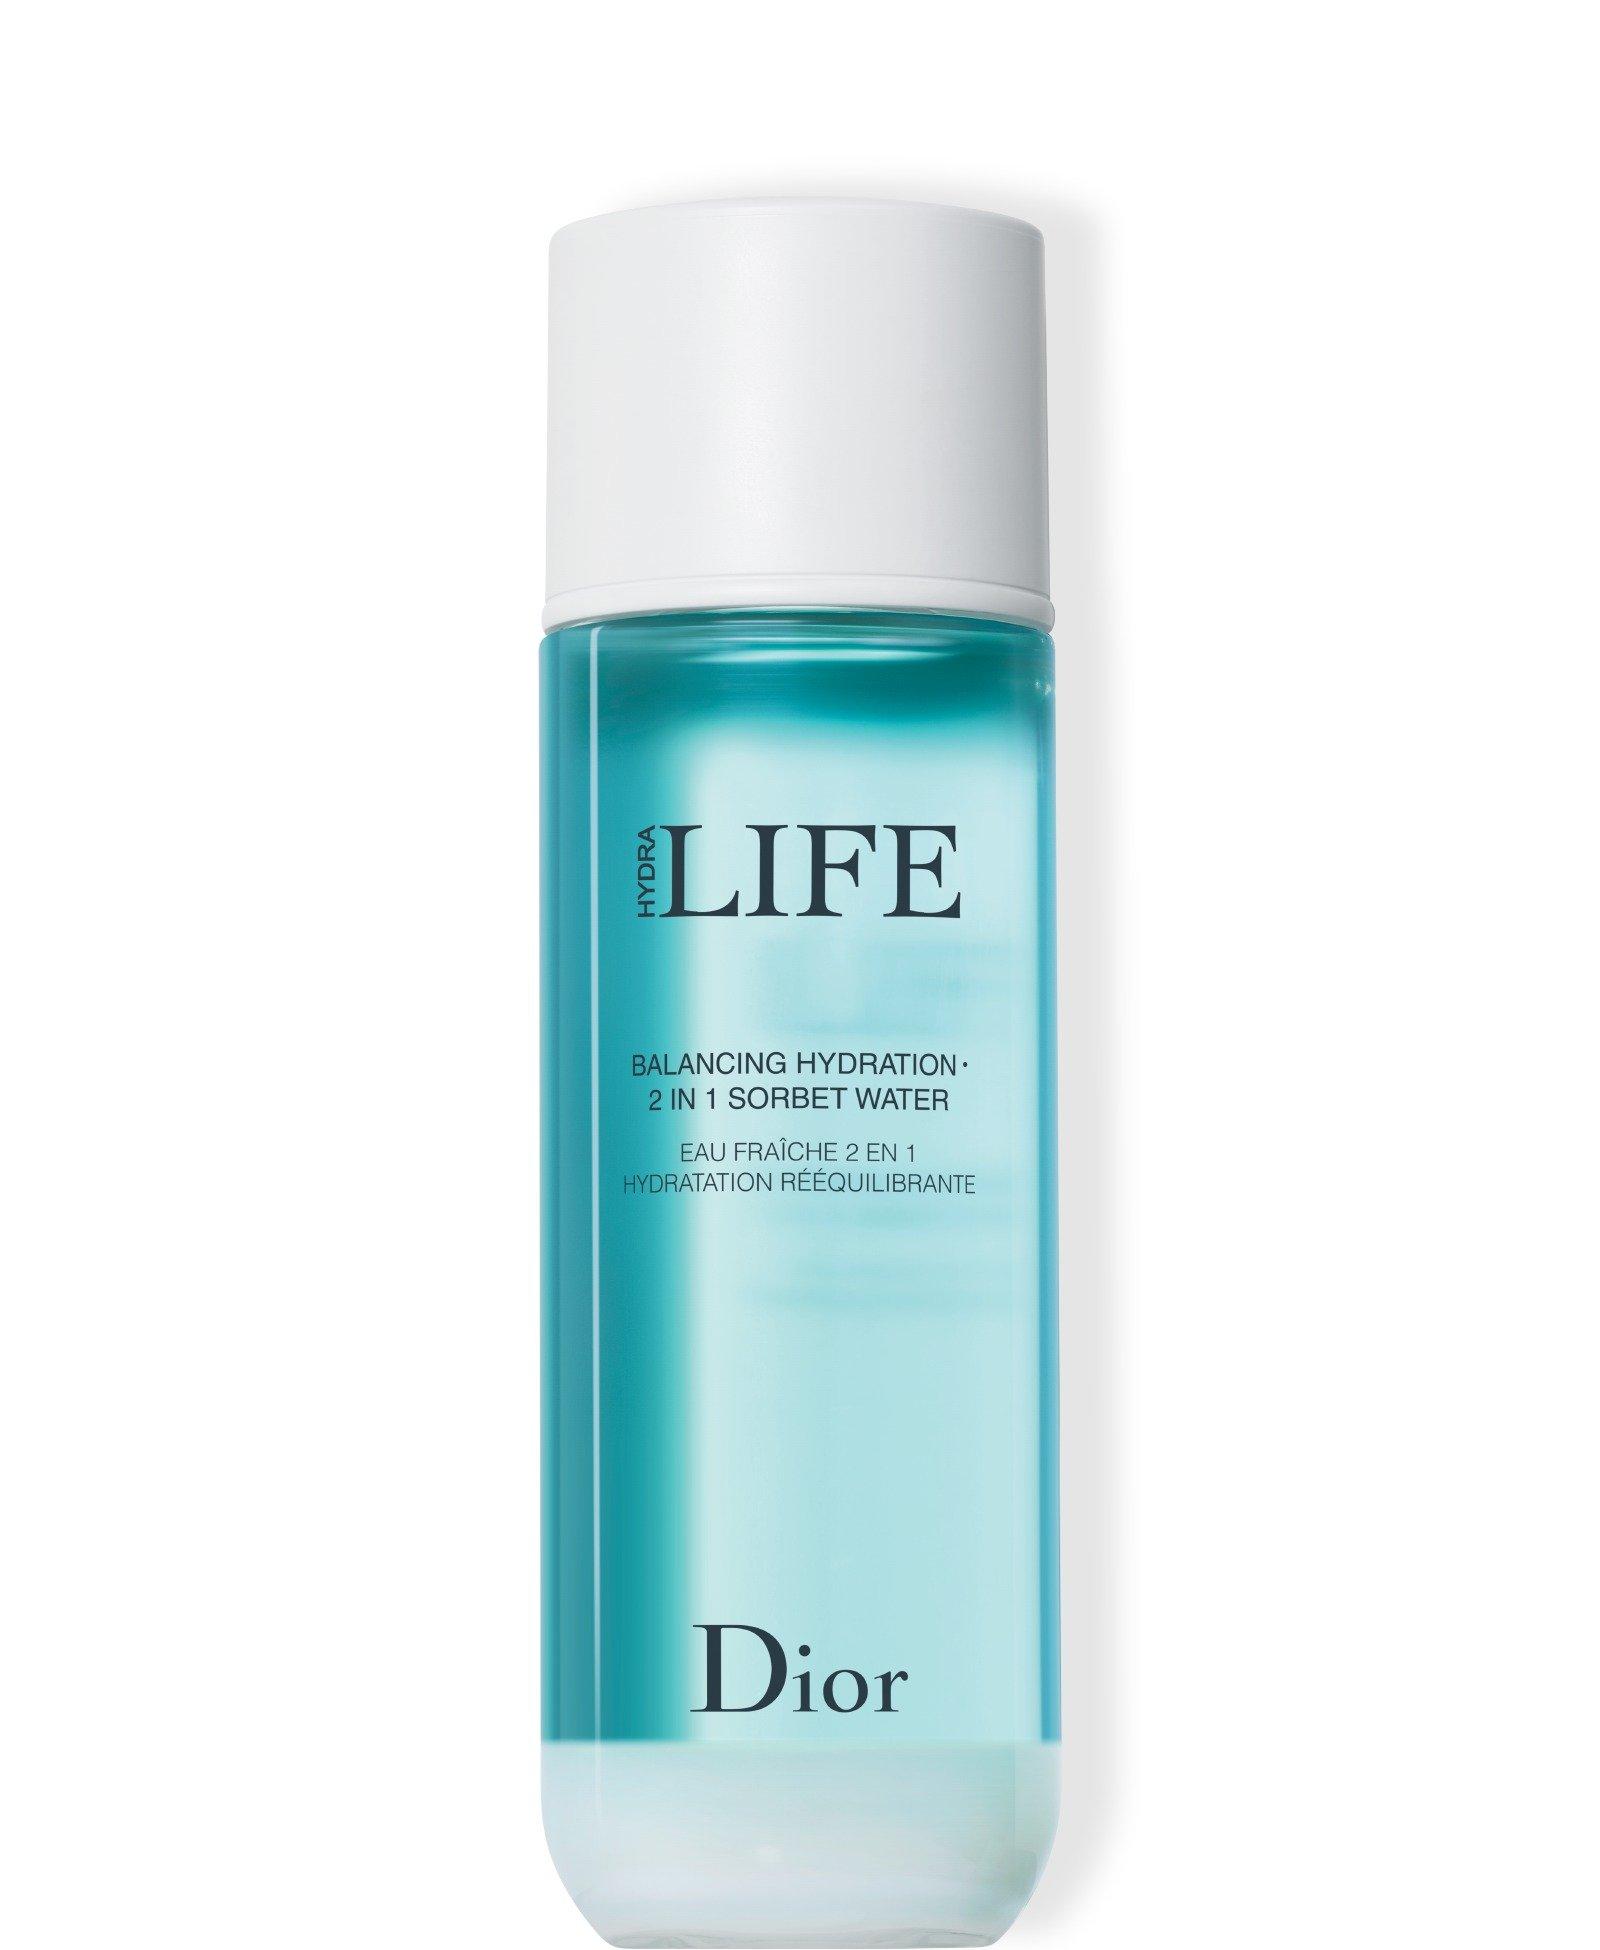 Image of Dior Hydra Life 2 in 1 Sorbet Water - 175ml